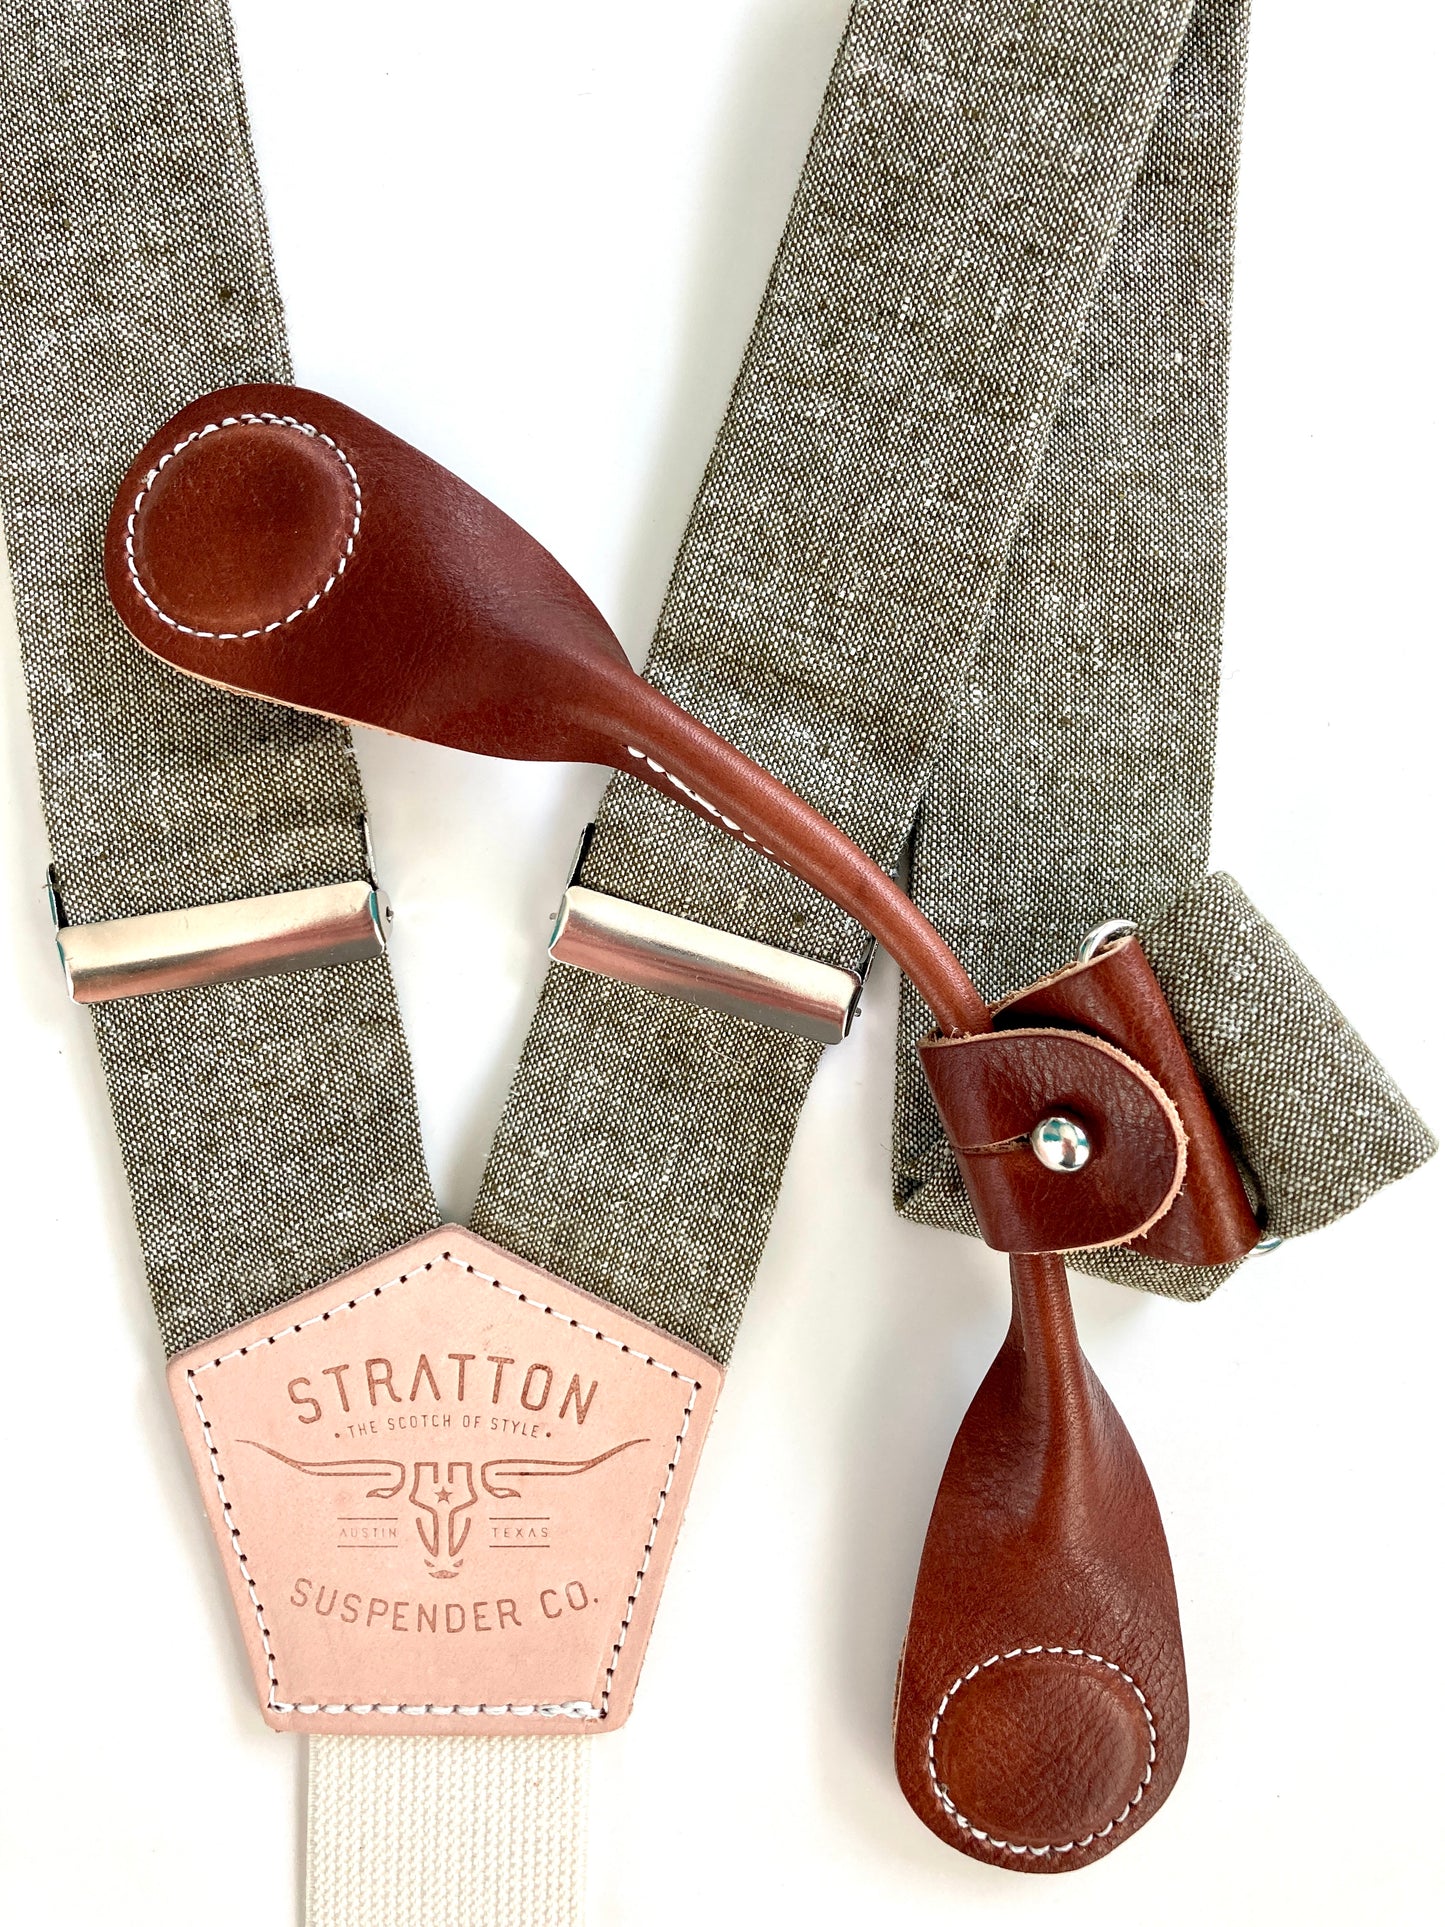 Stratton Suspender Co. features the Olive Green linen suspenders on veg tan shoulder leather with cream colored elastic back strap for the Fall 2022 suspenders collection Magnetic Stratton Suspender clasps in Cognac Pontedero Italian leather hand-picked by Stratton Suspender Co.